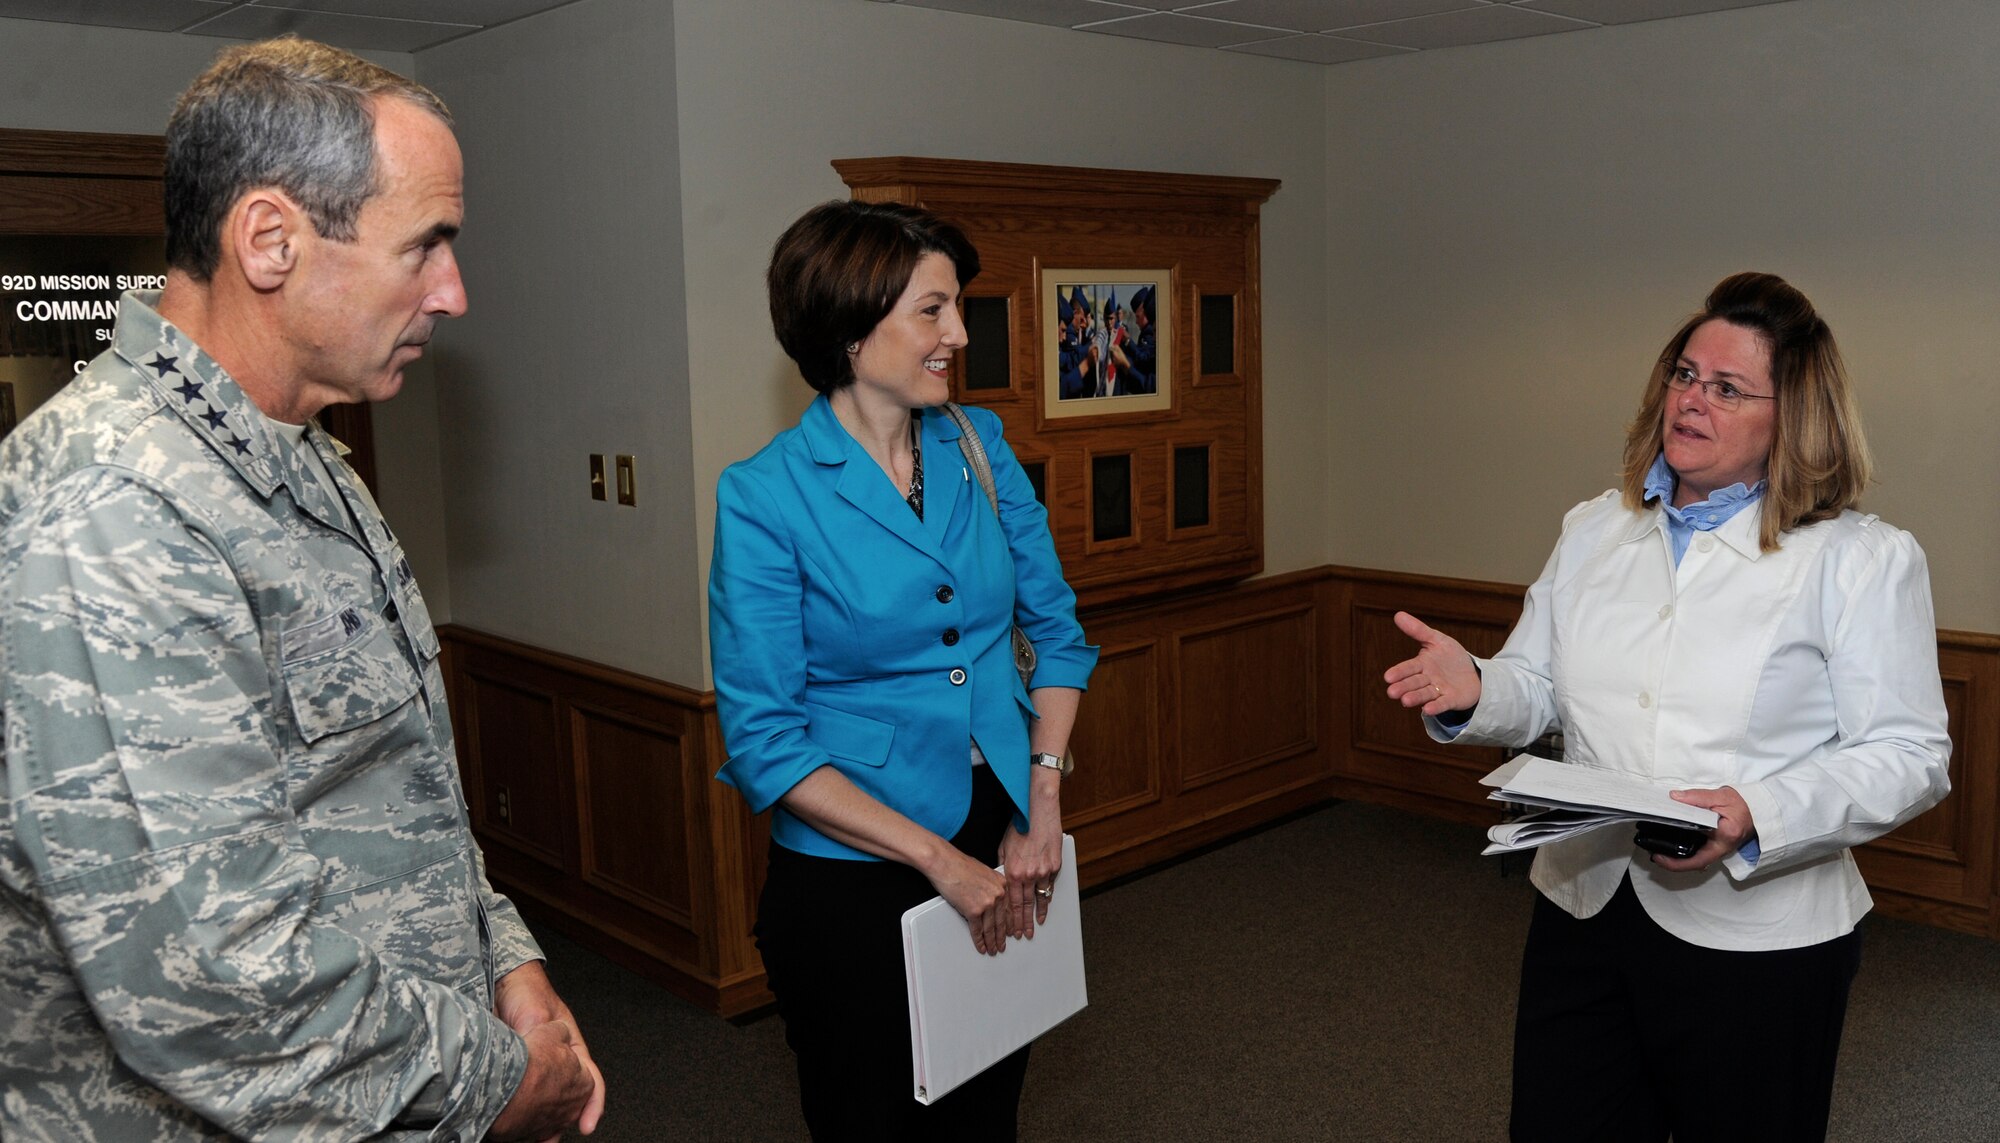 Gen. Raymond Johns, Jr., Air Mobility Command commander, along with Cathy McMorris Rogers, U.S. Representative for the 5th District of Washington, discuss protocol matters with Bo Smith-Tallan, 92nd Air Refueling Wing protocol chief, during a recent visit to Fairchild Air Force Base, Wash., May 19, 2012. If something needs to be done, whether it’s picking up trash, pitching luggage or washing vehicles and someone else hasn't done their job, then the wing’s protocol office is there getting the mission done. (U.S. Air Force photo by Airman 1st Class Ryan Zeski/Released)